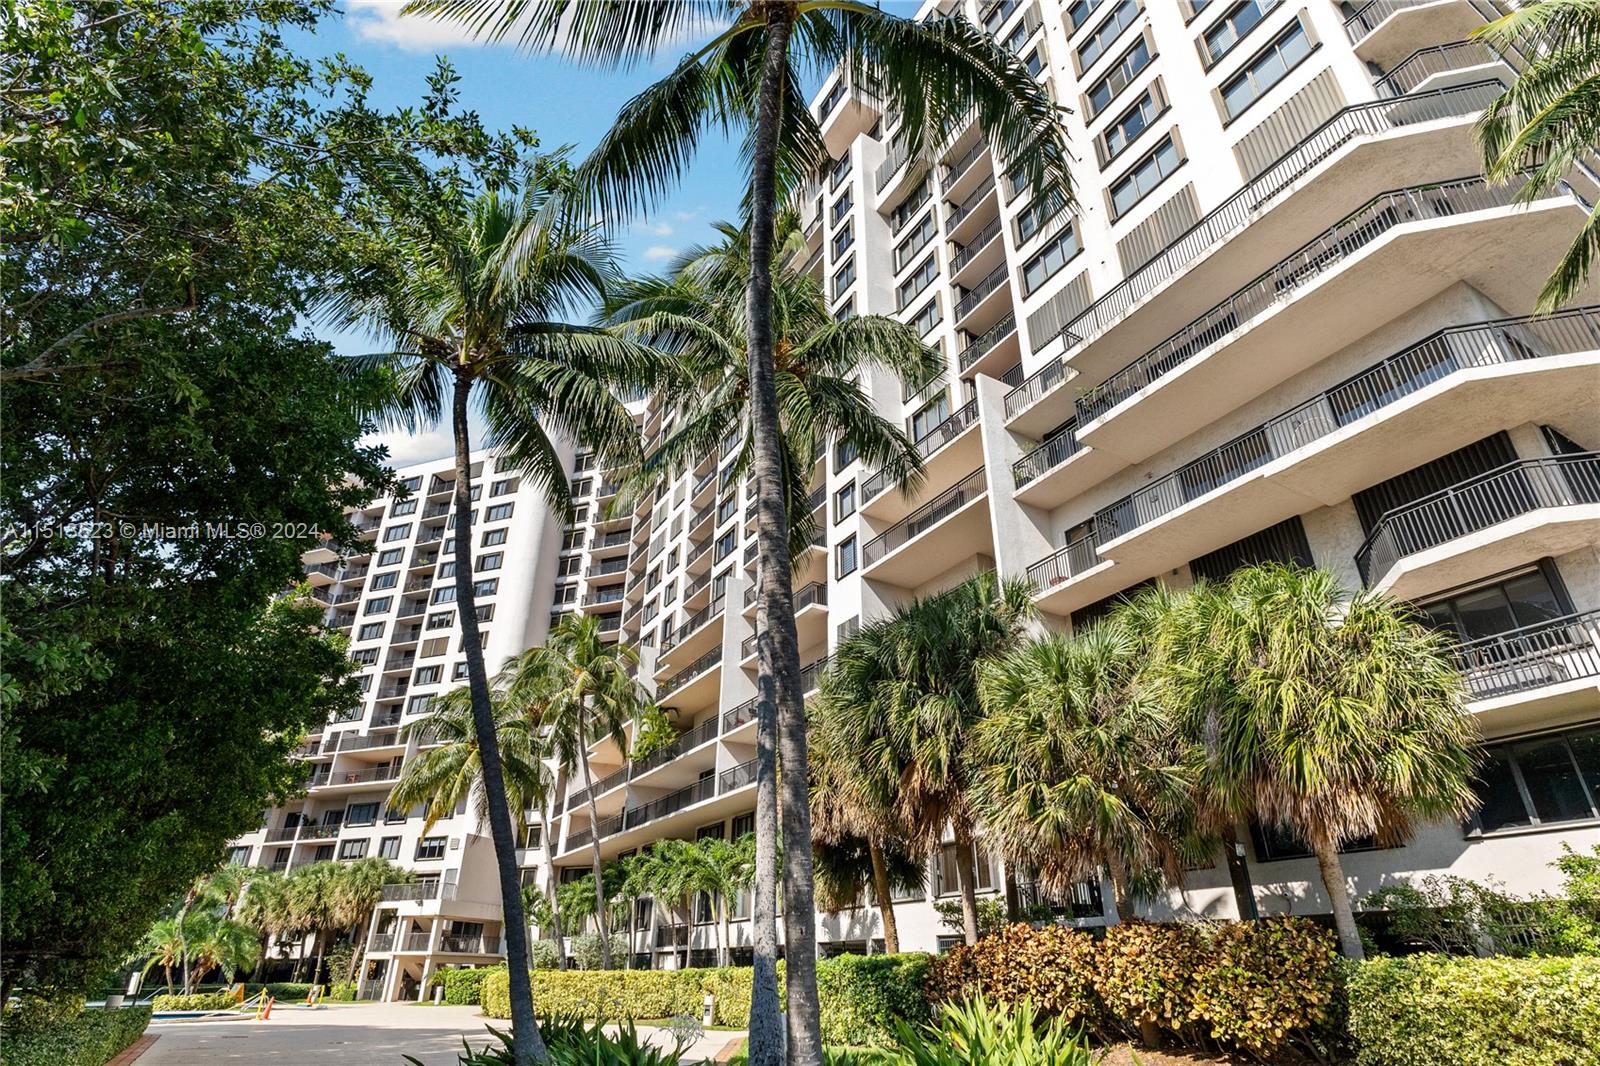 Immaculate 1 bed/1.5 bath with water and city views... Come and enjoy Resort-style living that Brickell Key offers. Great amenities that include: pool, jacuzzi, gym, sauna, tennis, racket ball and more.